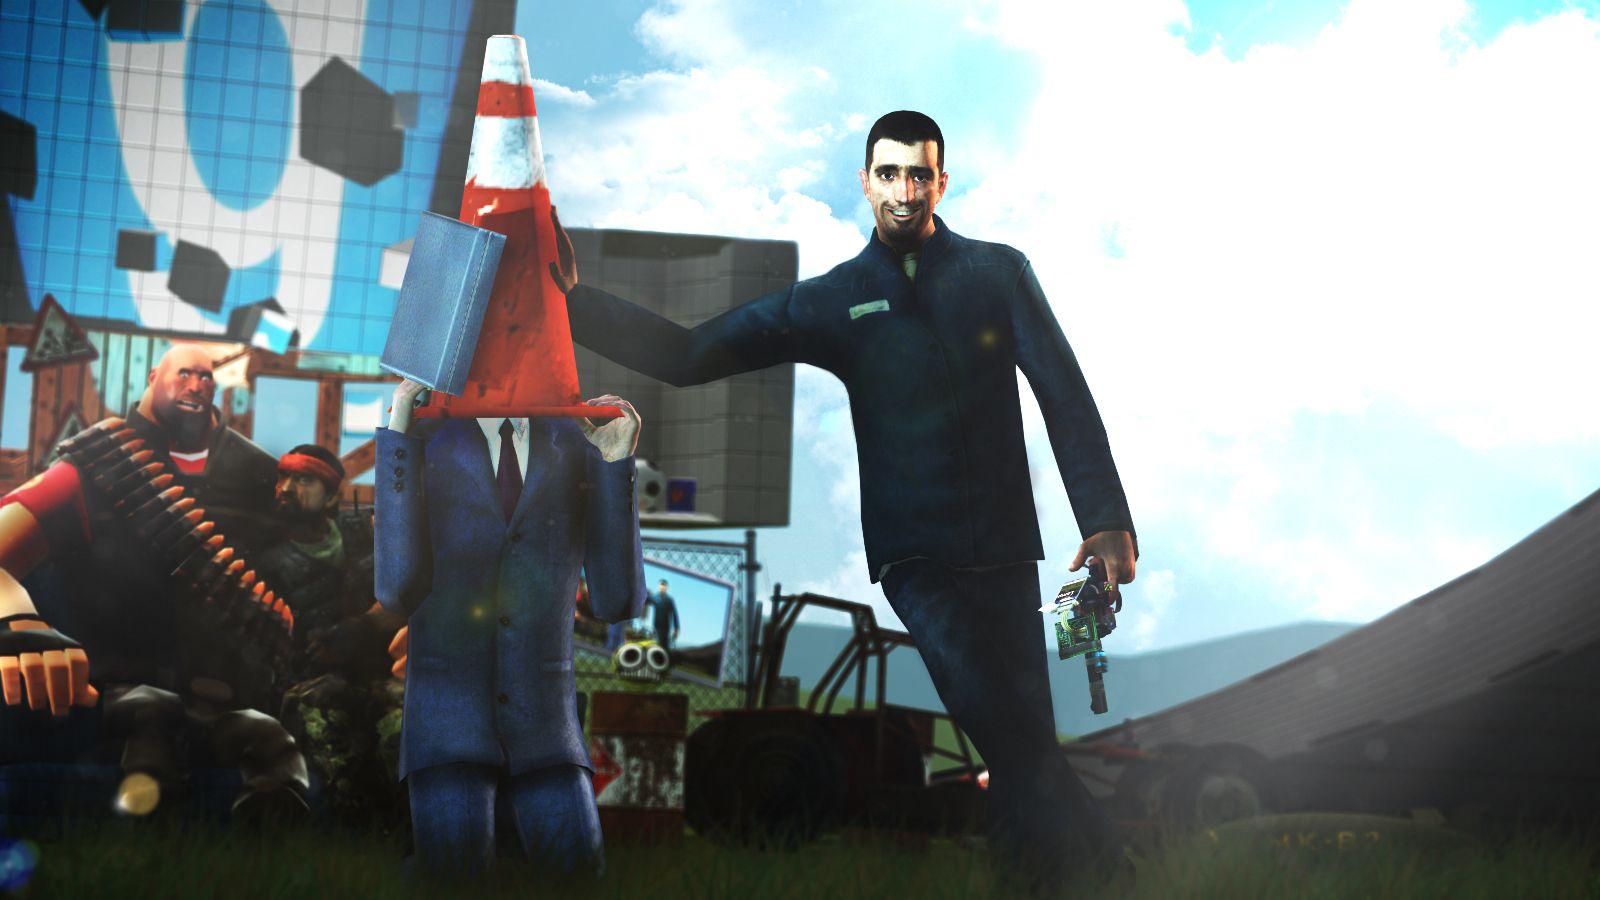 Gman with cone hat. Garry's Mod